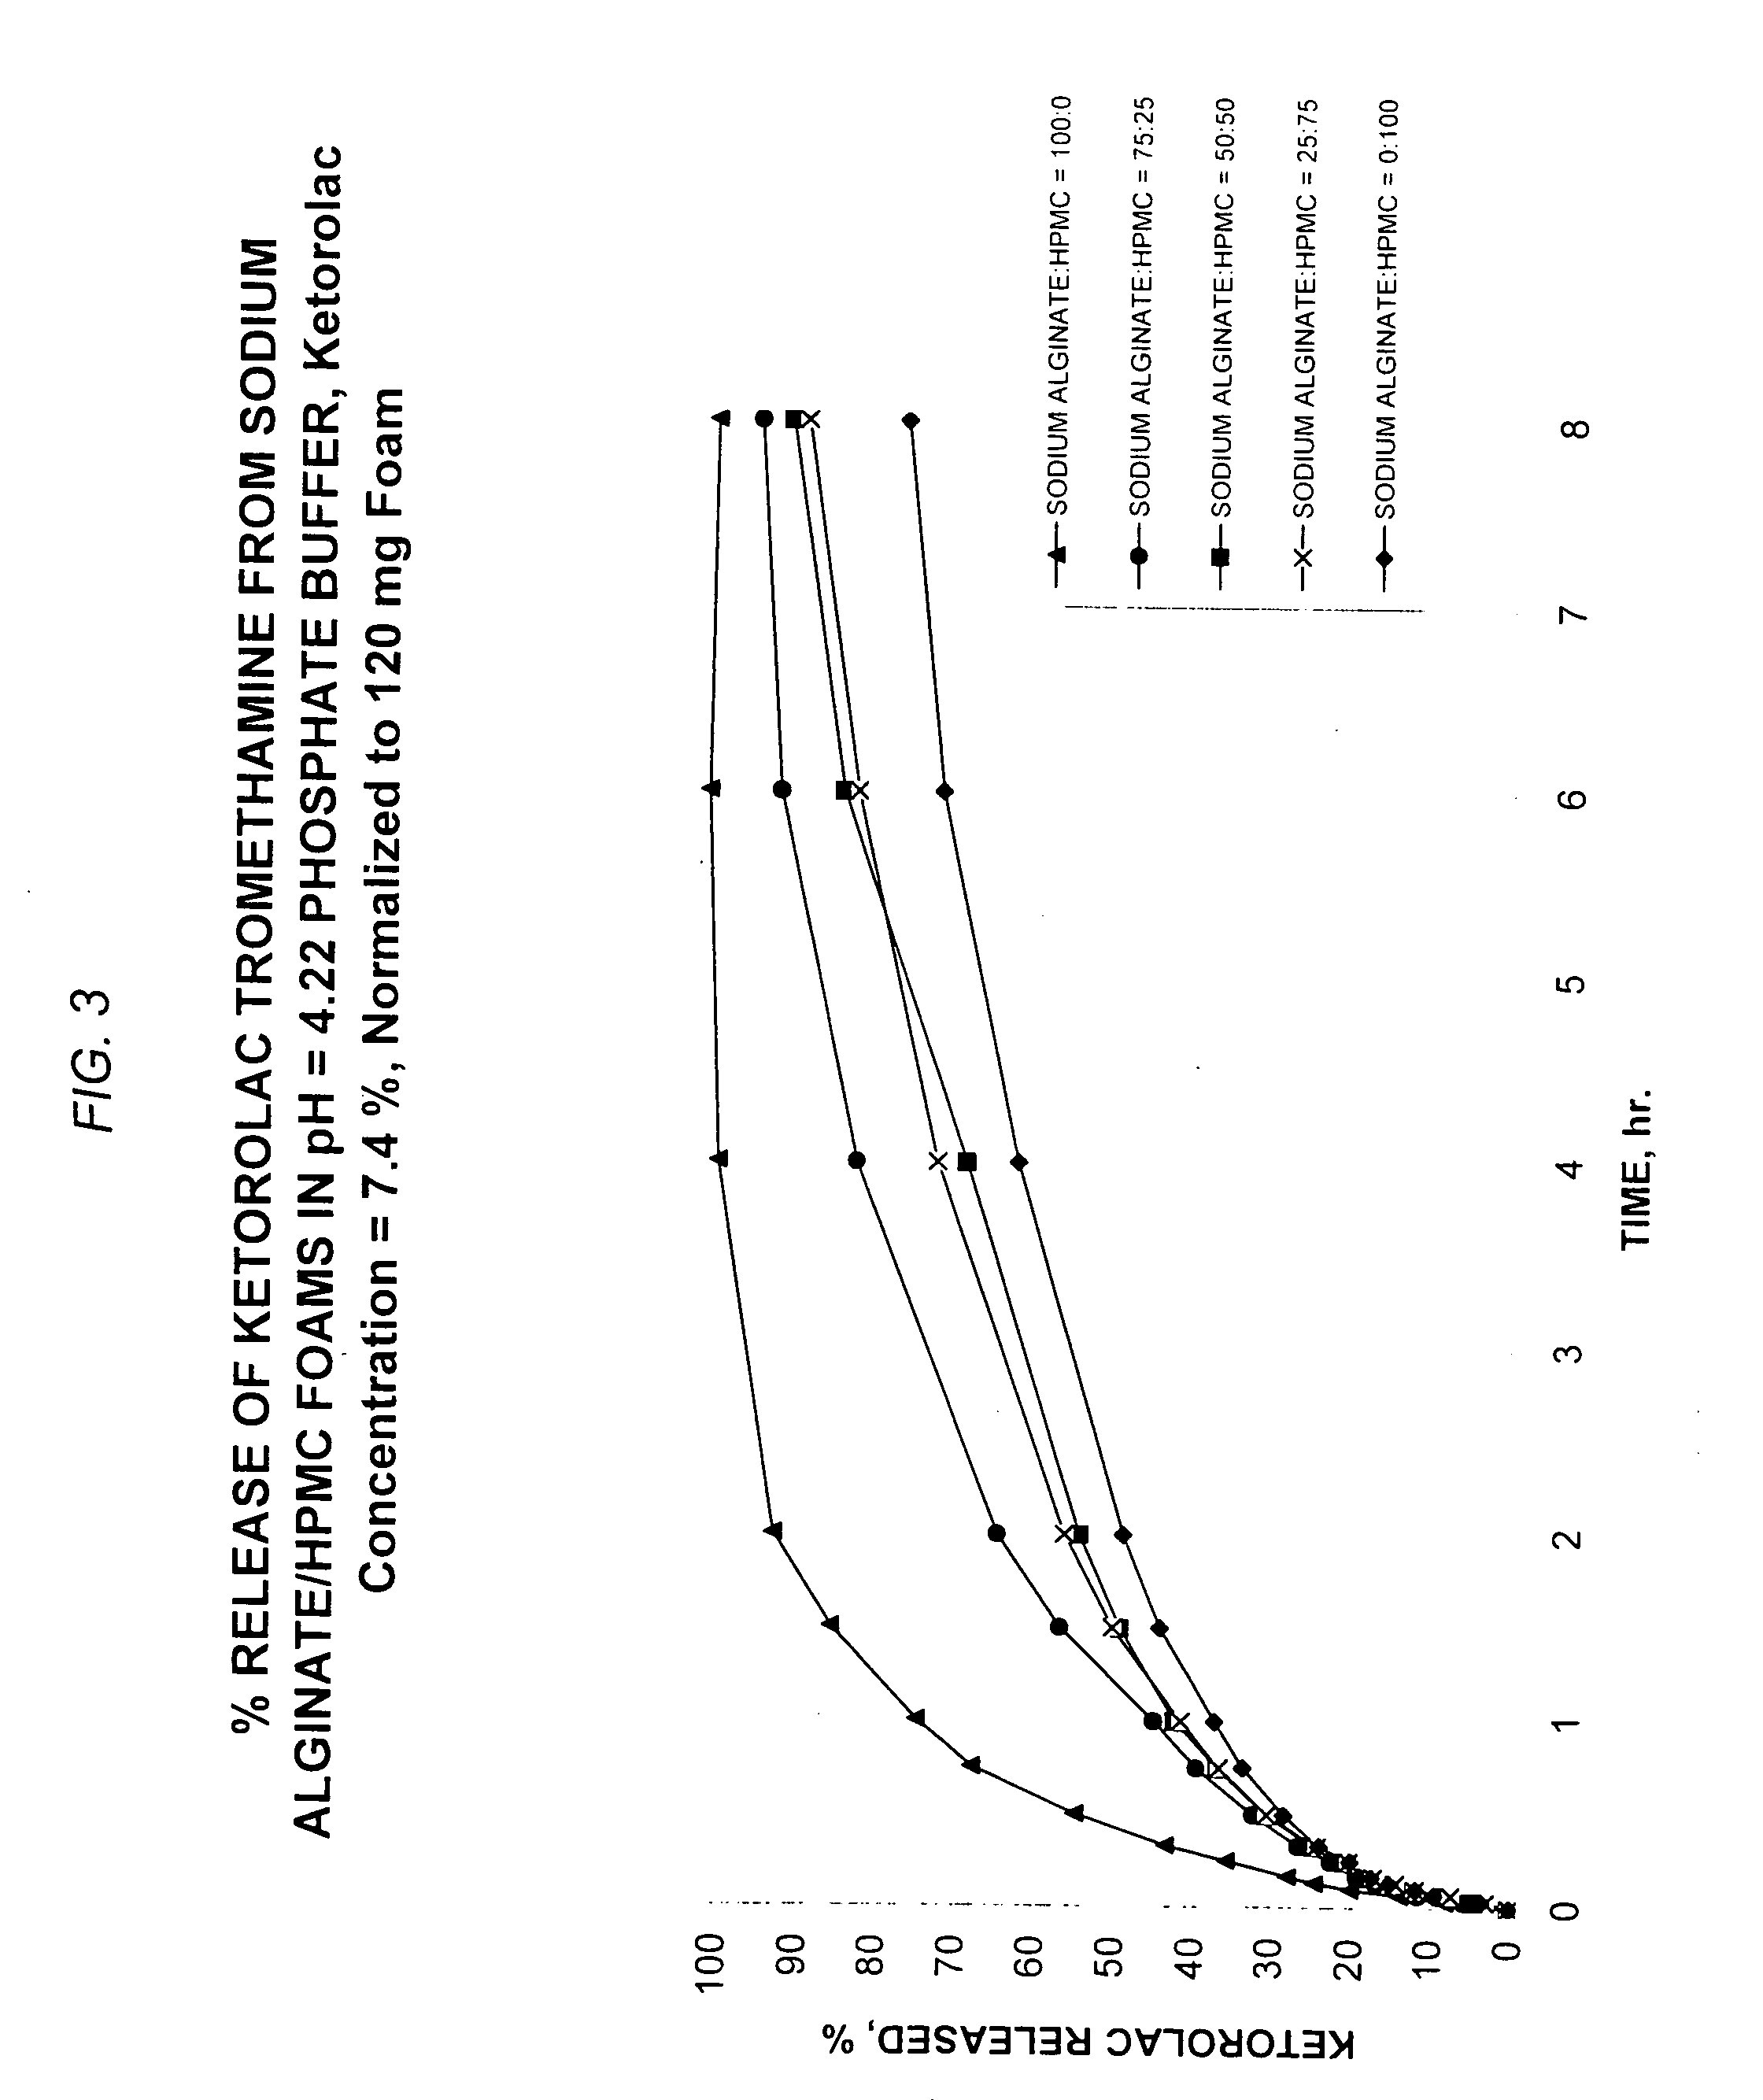 Coated vaginal devices for vaginal delivery of therapeutically effective and/or health-promoting agents